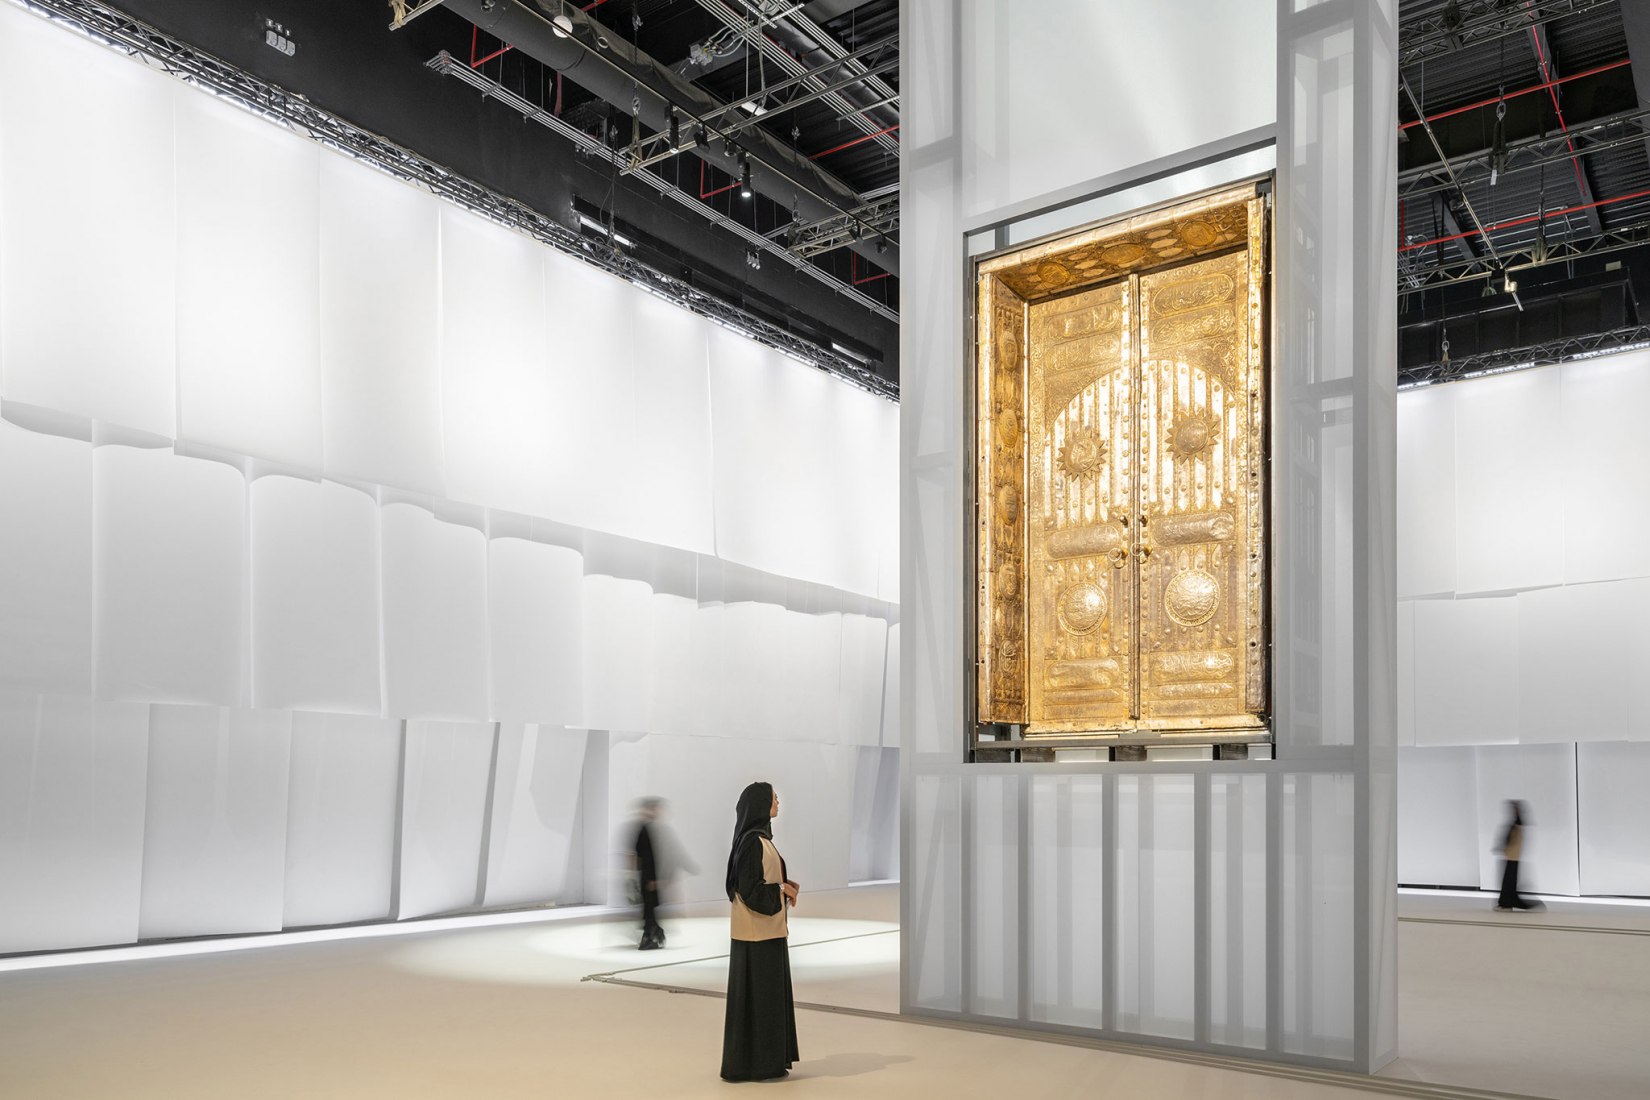 Islamic Arts Biennale design by OMA. Photograph by Marco Cappelletti.